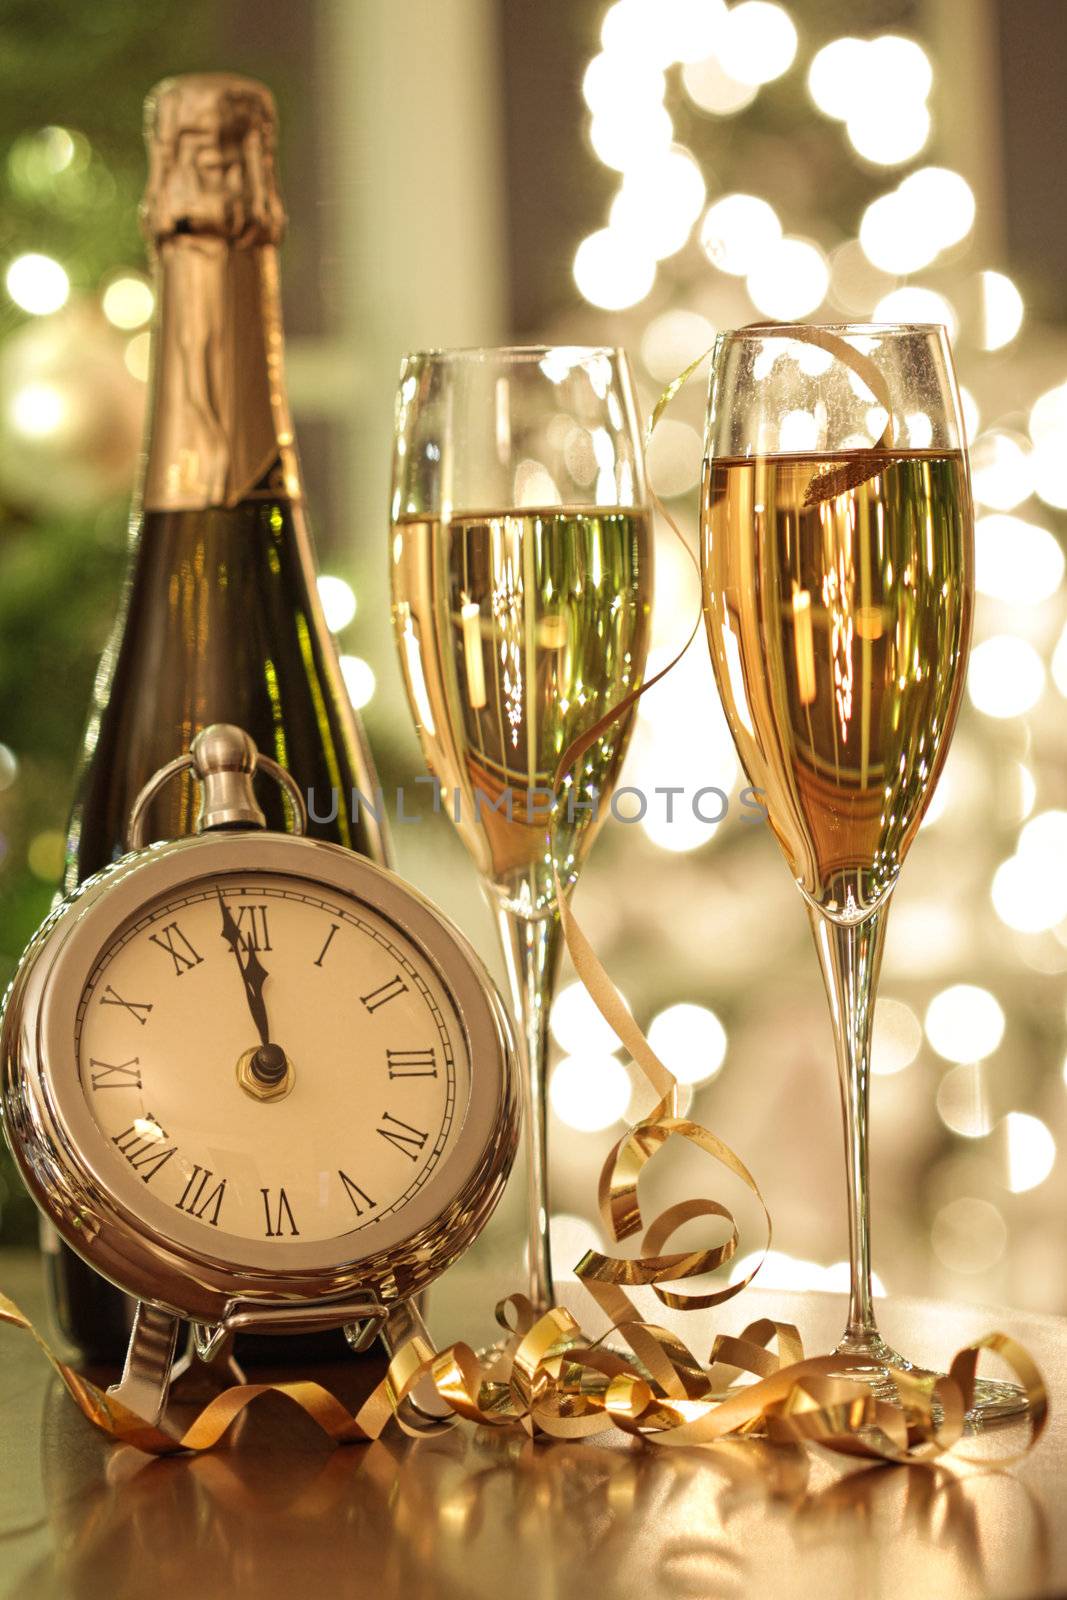 Champagne glasses ready to bring in the New Year by Sandralise